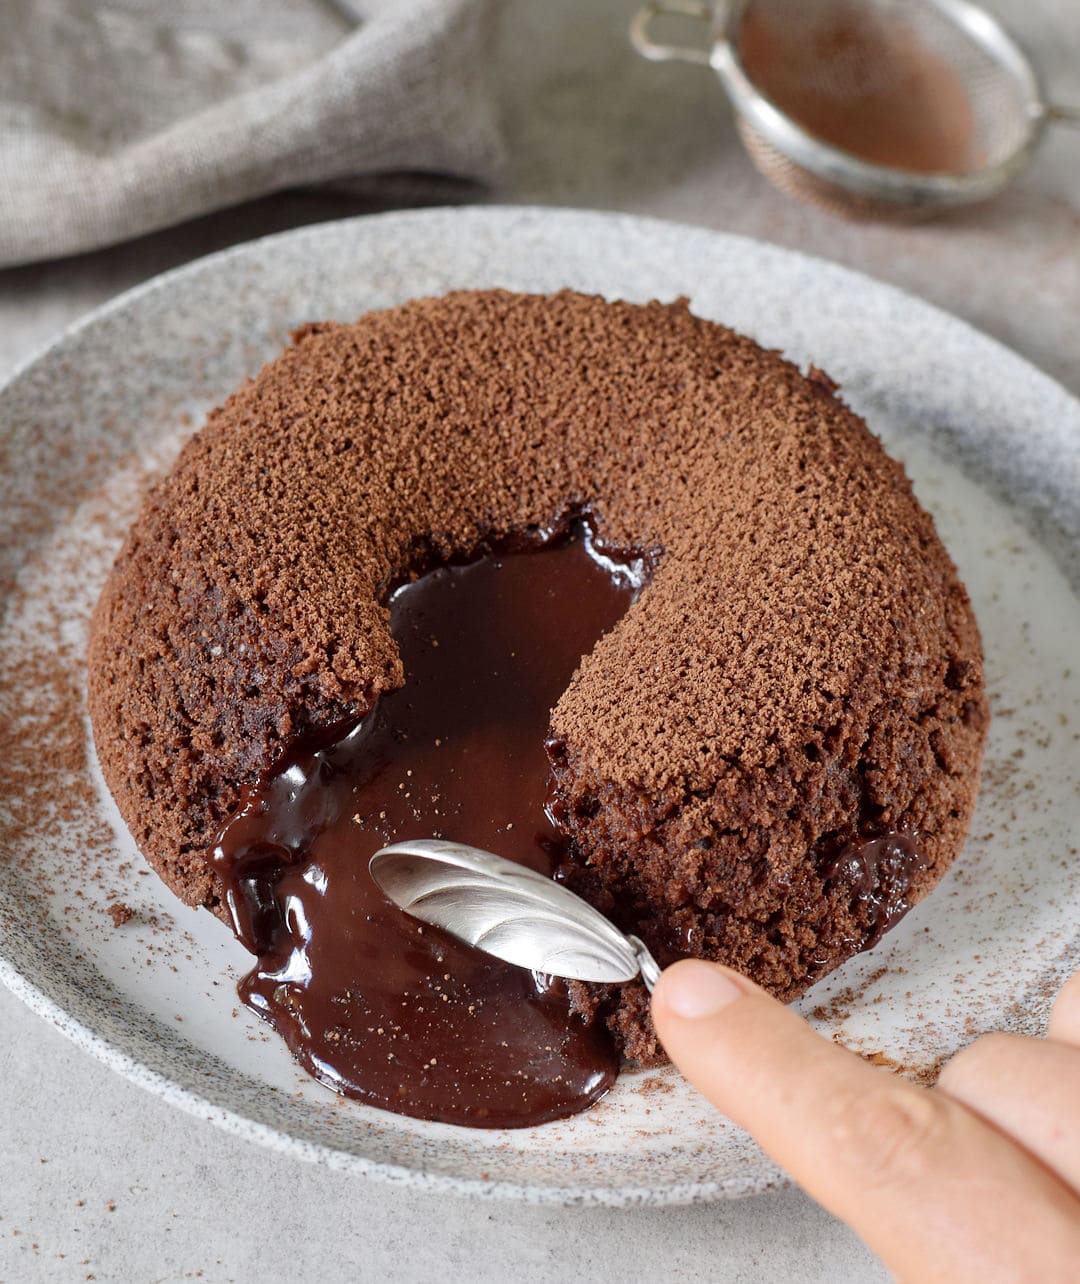 Eating dairy-free lava cake with chocolate center